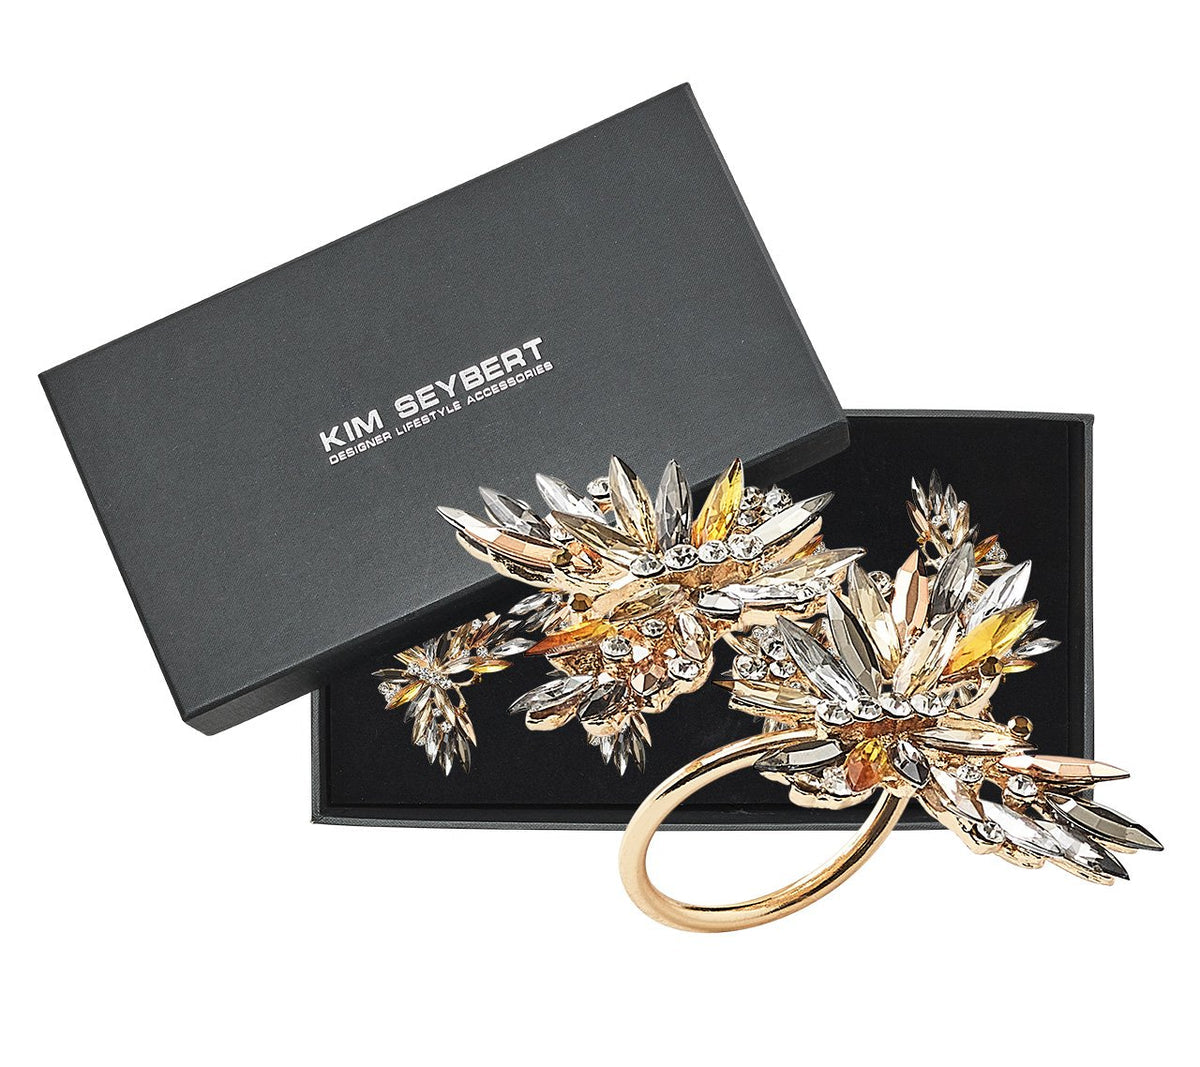 Butterflies Napkin Ring in Champagne & Crystal, Set of 4, in a Gift Box by Kim Seybert